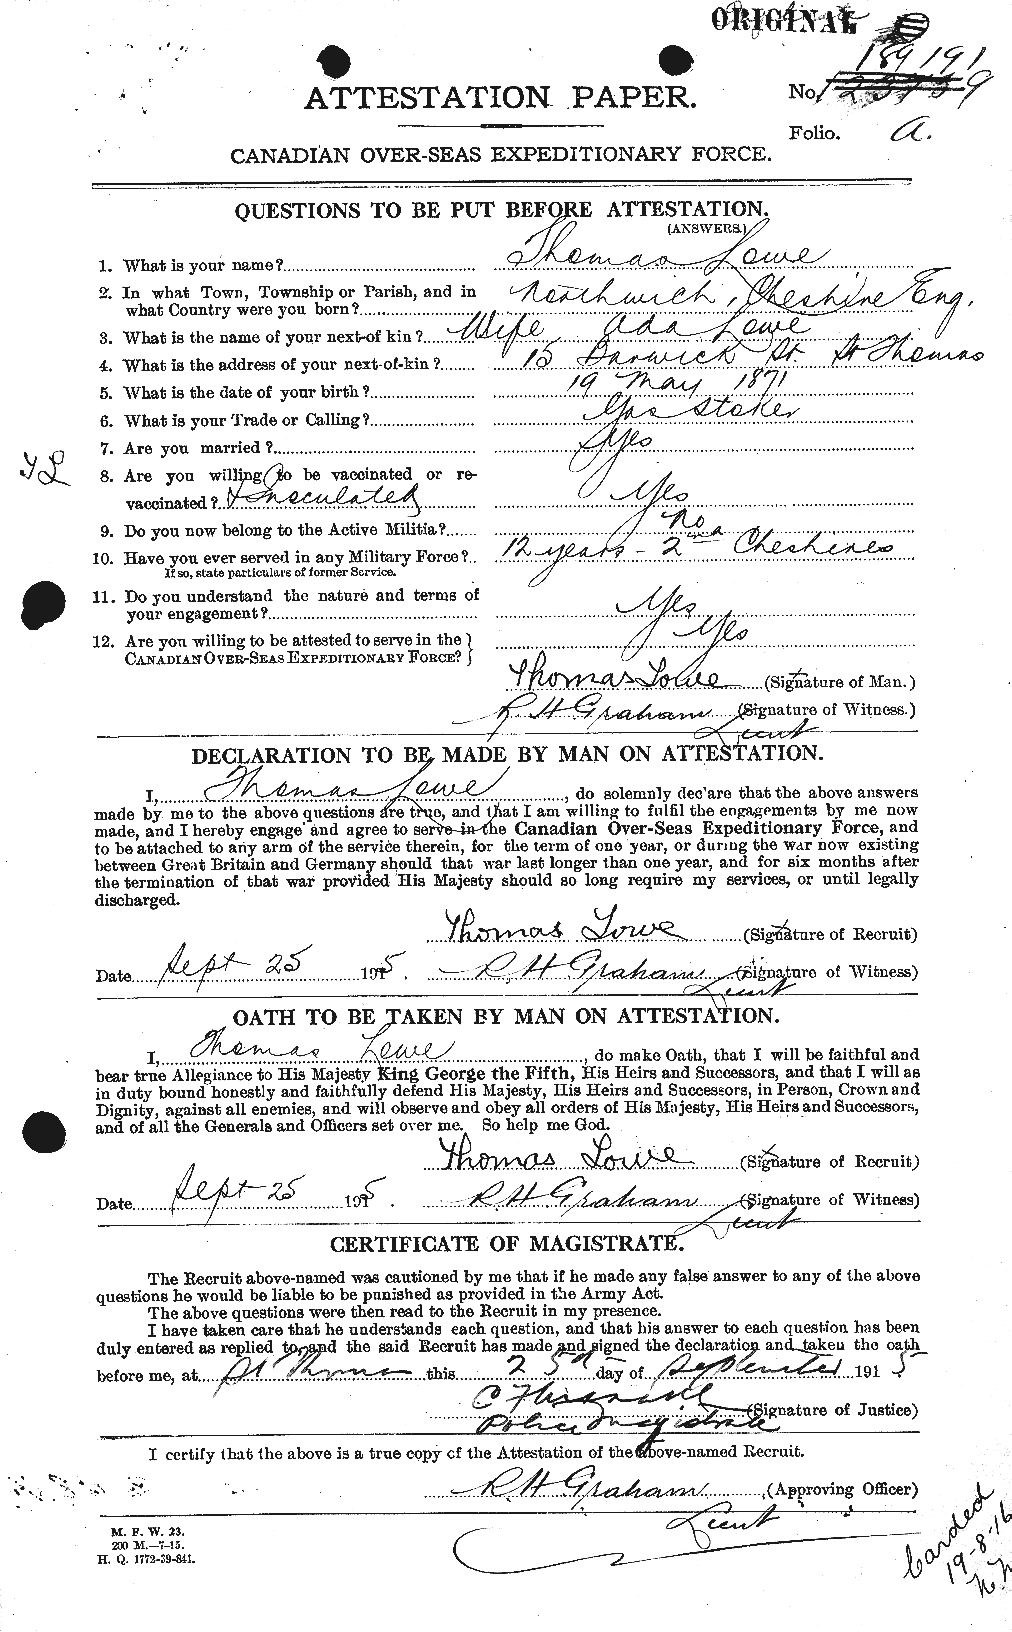 Personnel Records of the First World War - CEF 469711a